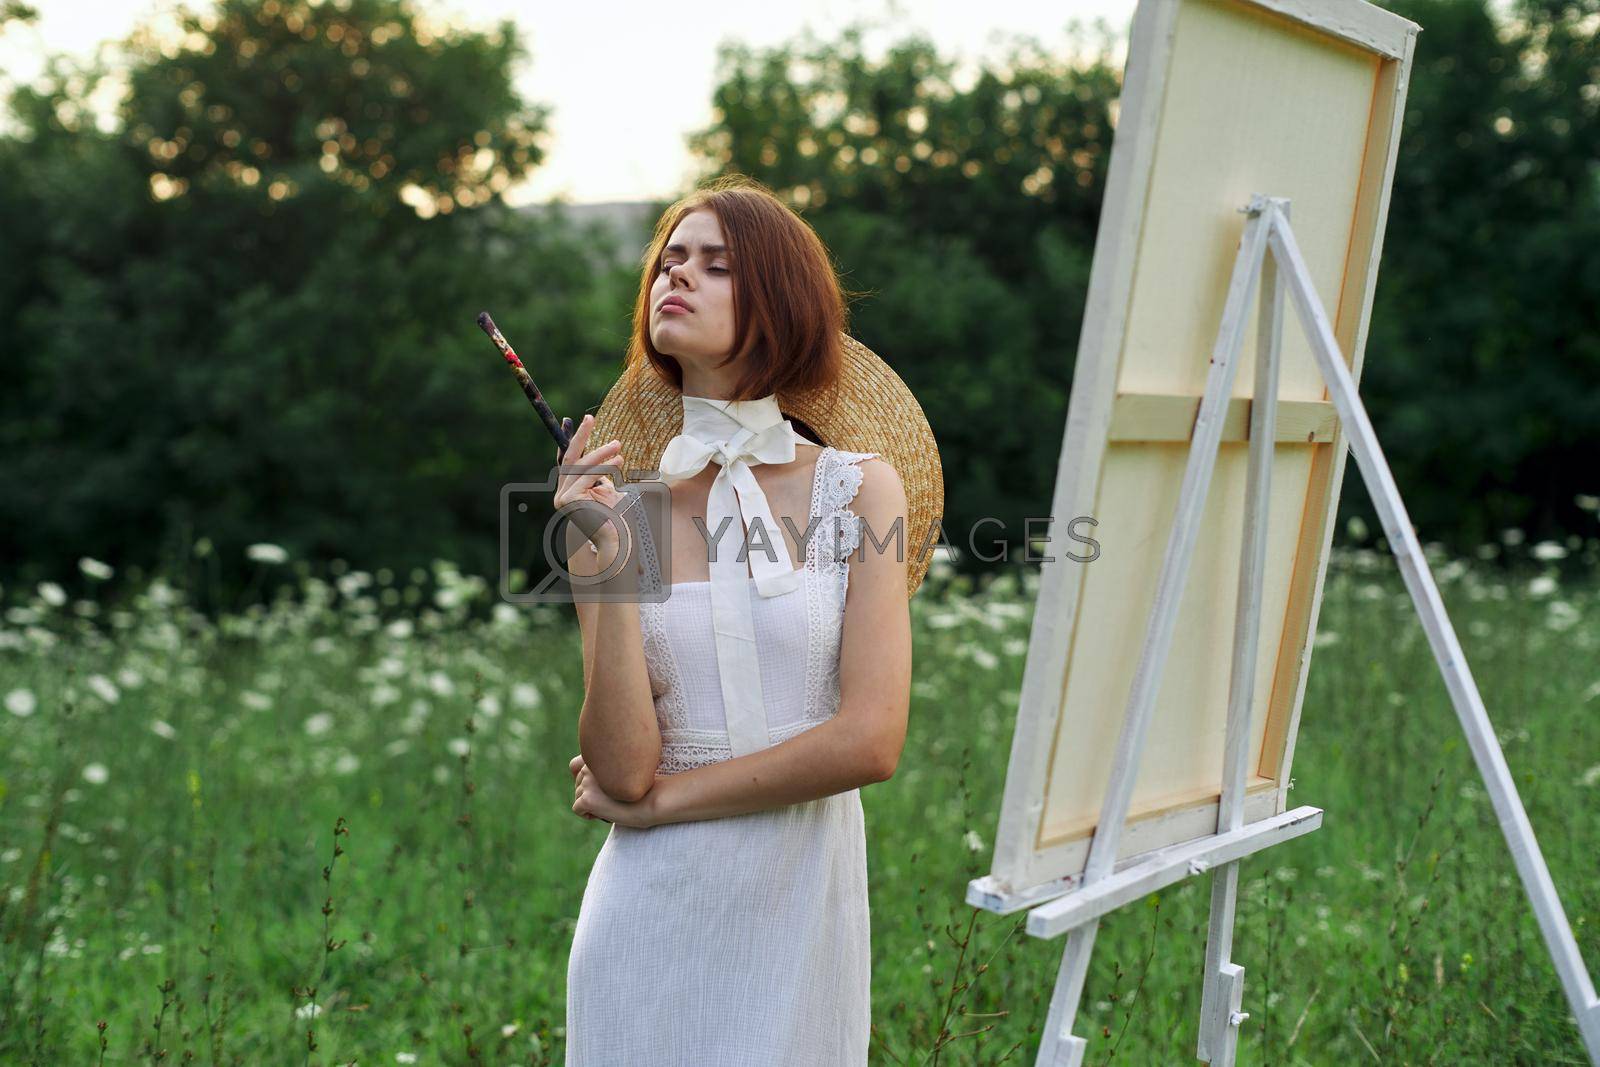 woman artist outdoors landscape creative hobby lifestyle. High quality photo